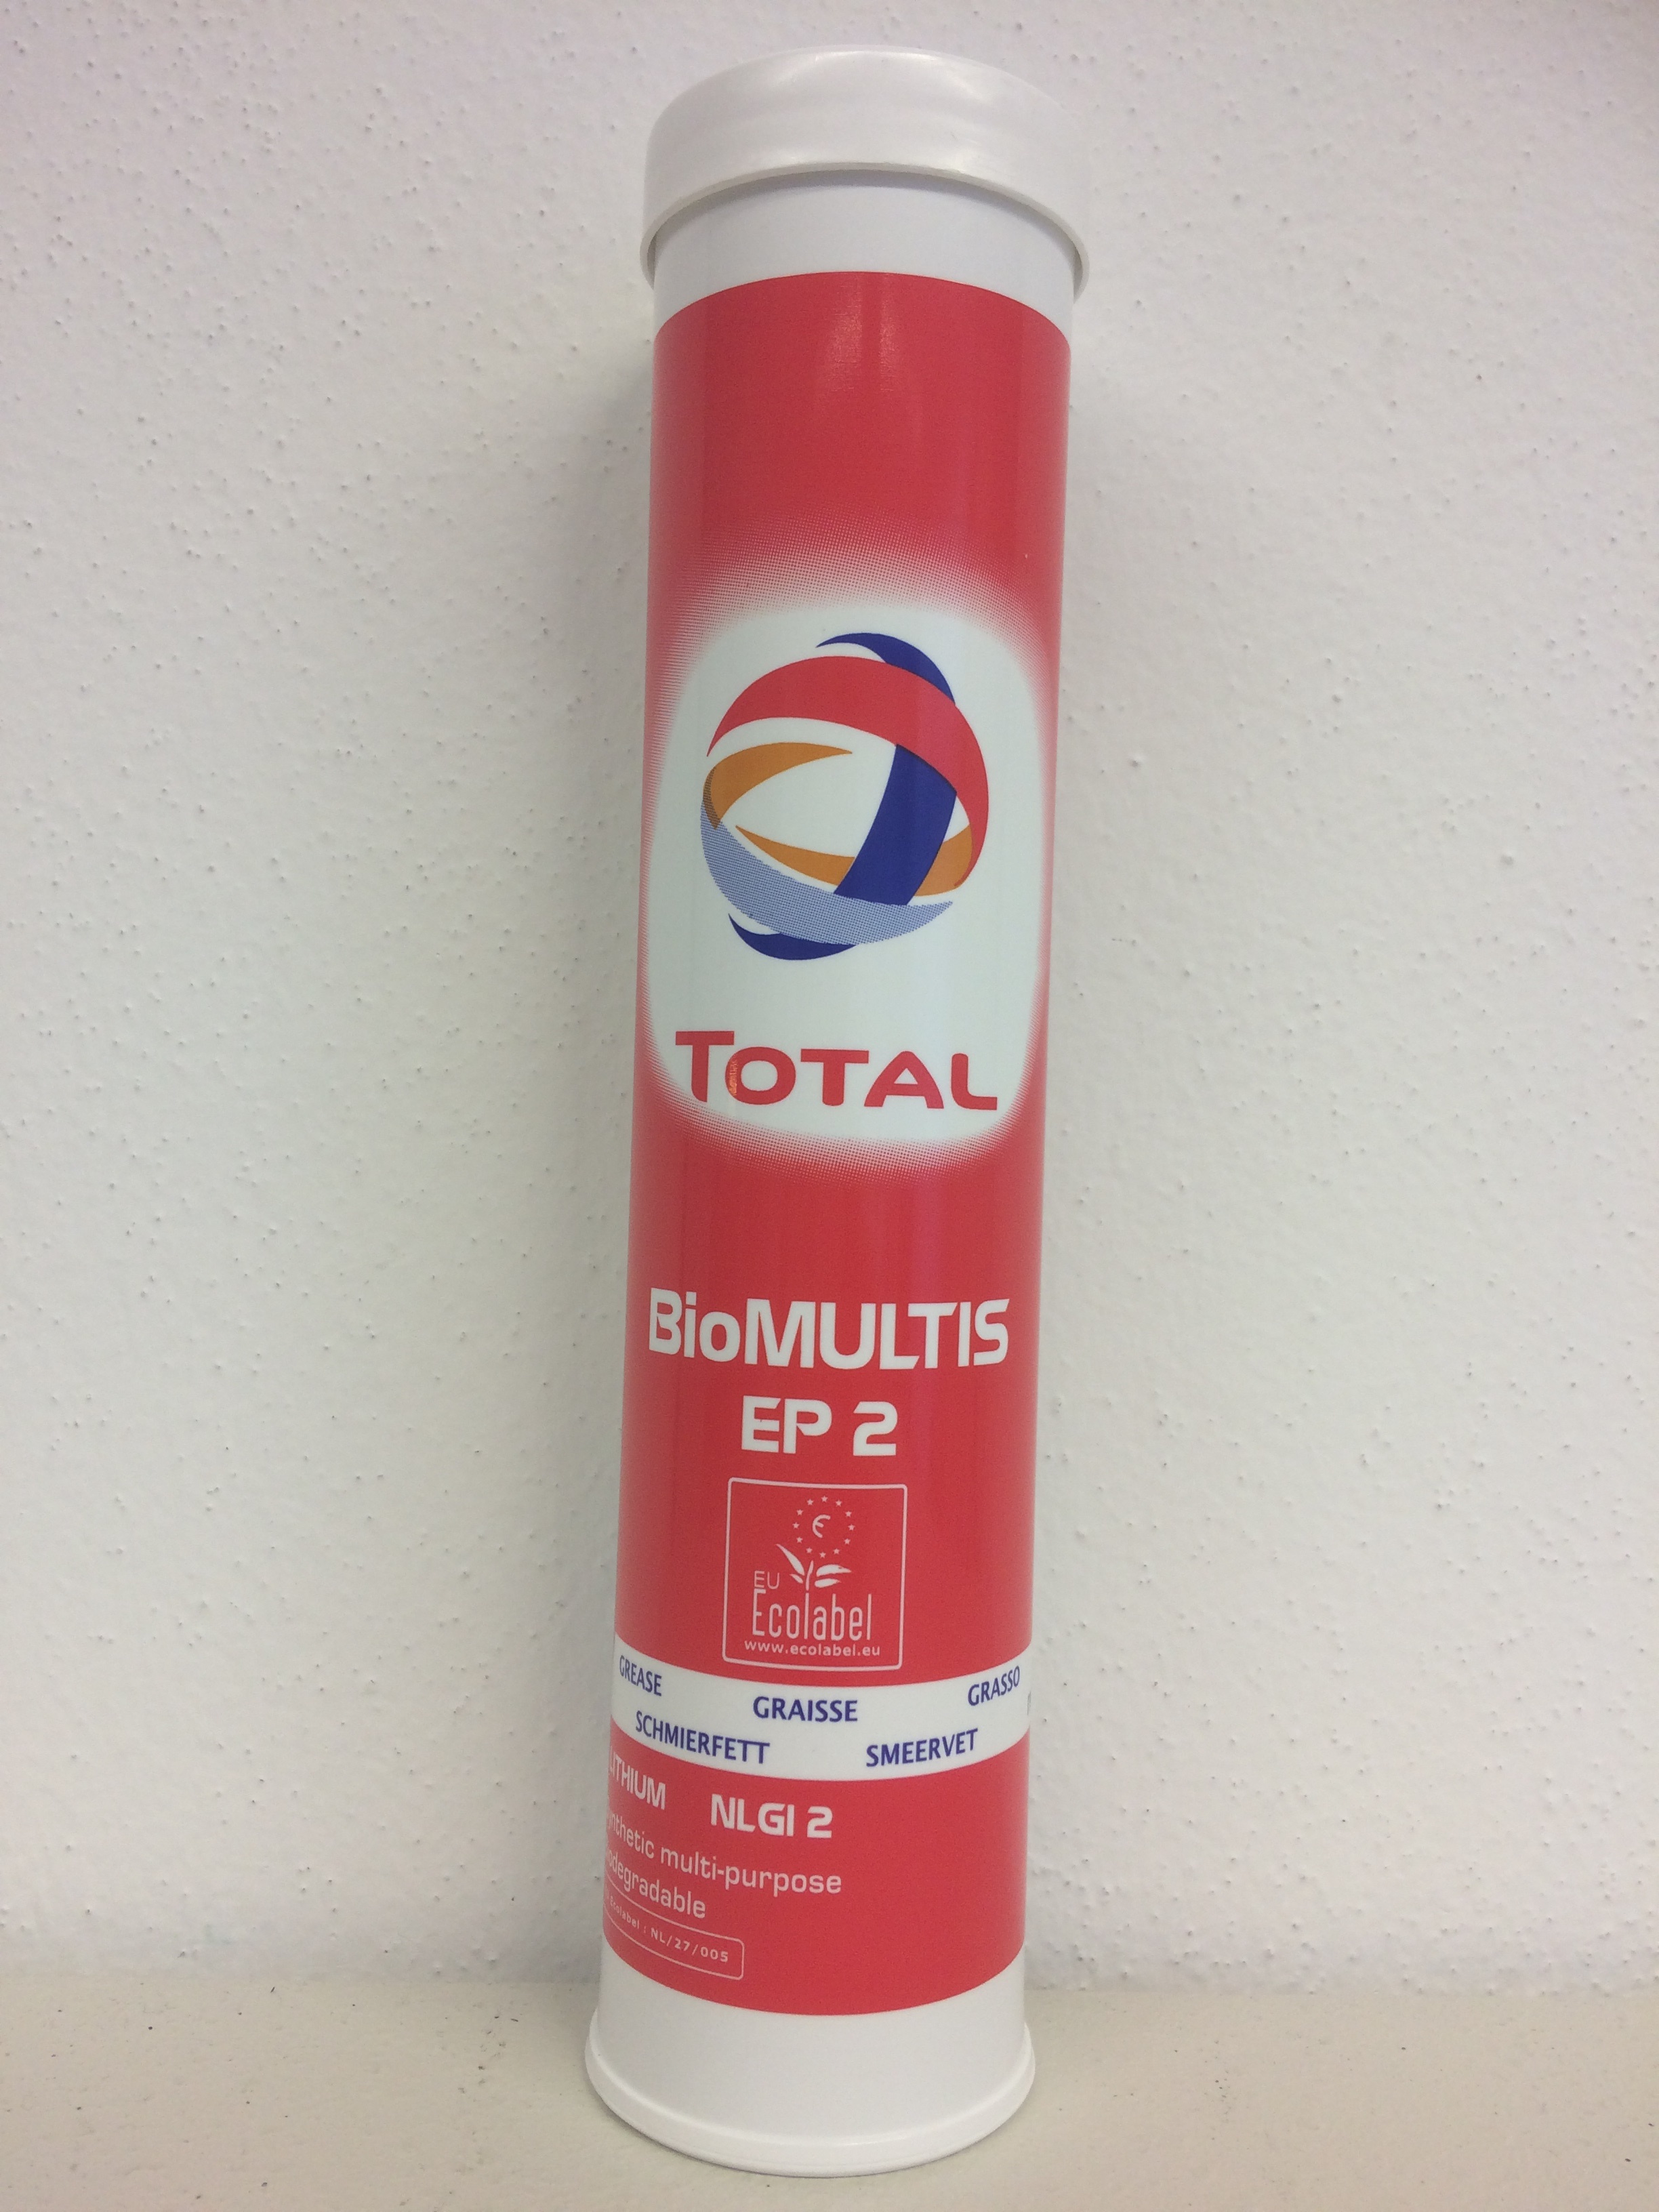 TOTAL BIOMULTIS EP 2 - 400 g